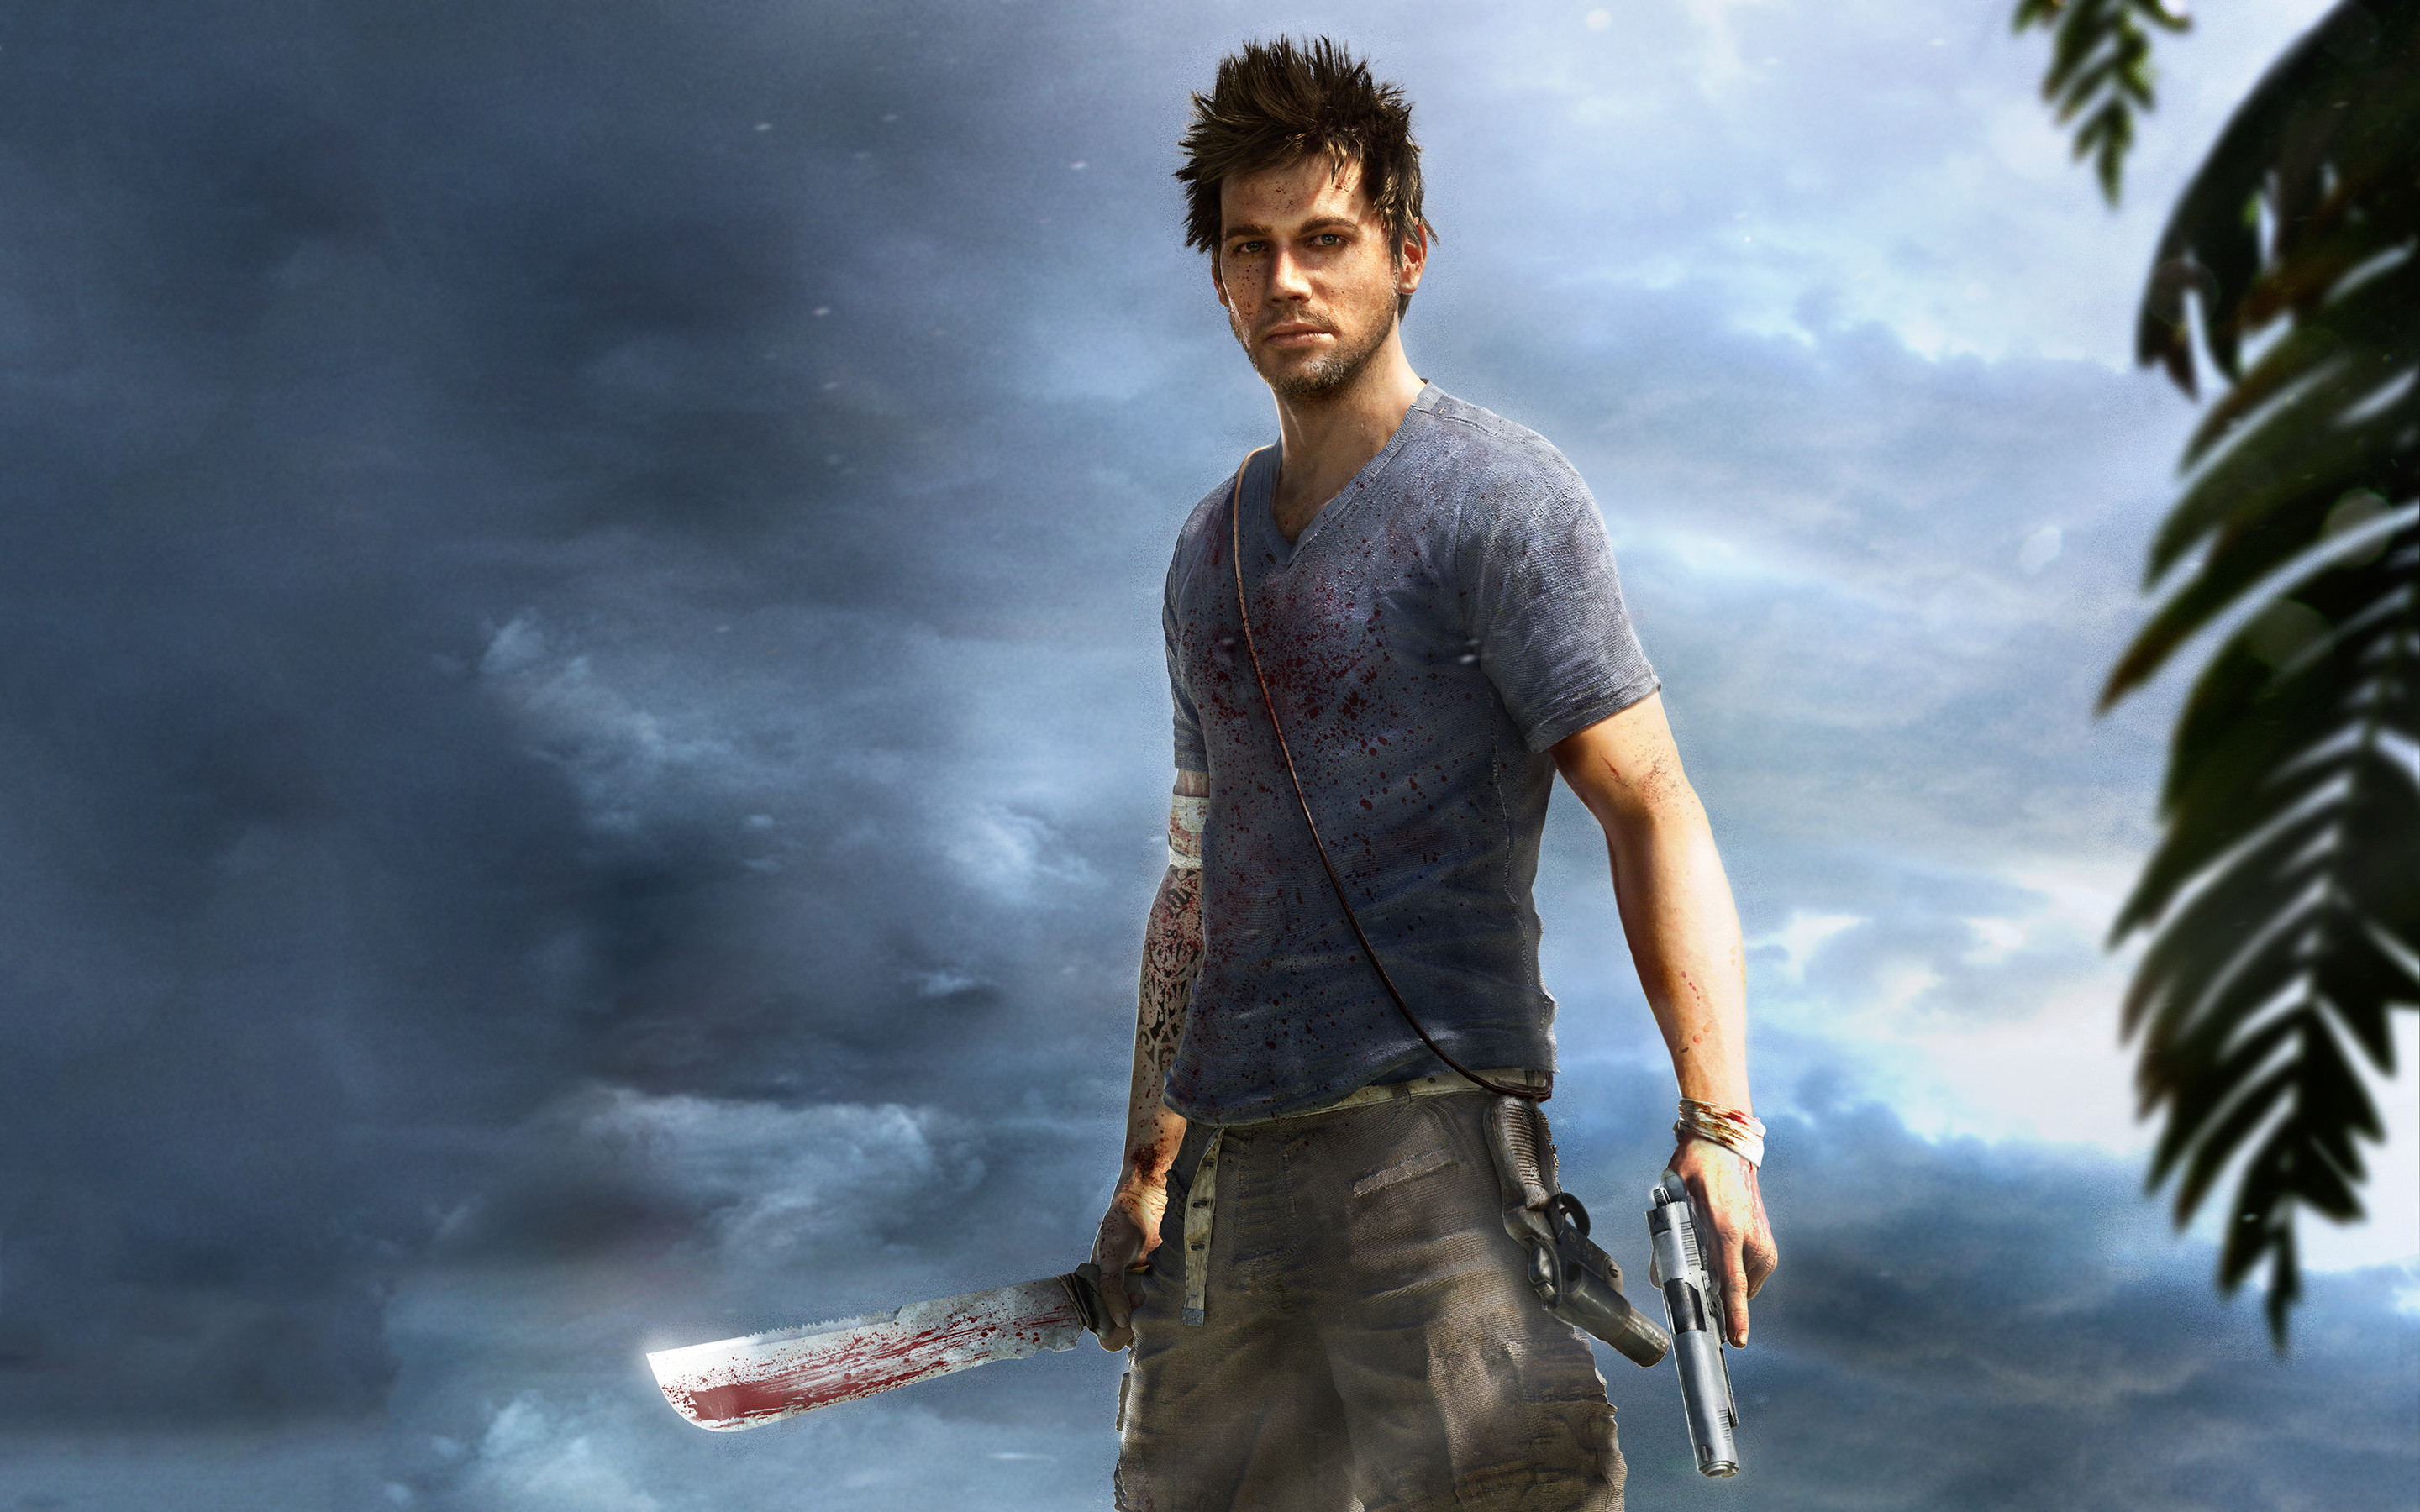 2880x1800 Far Cry 3 images far cry 3 jason HD wallpaper and background photos